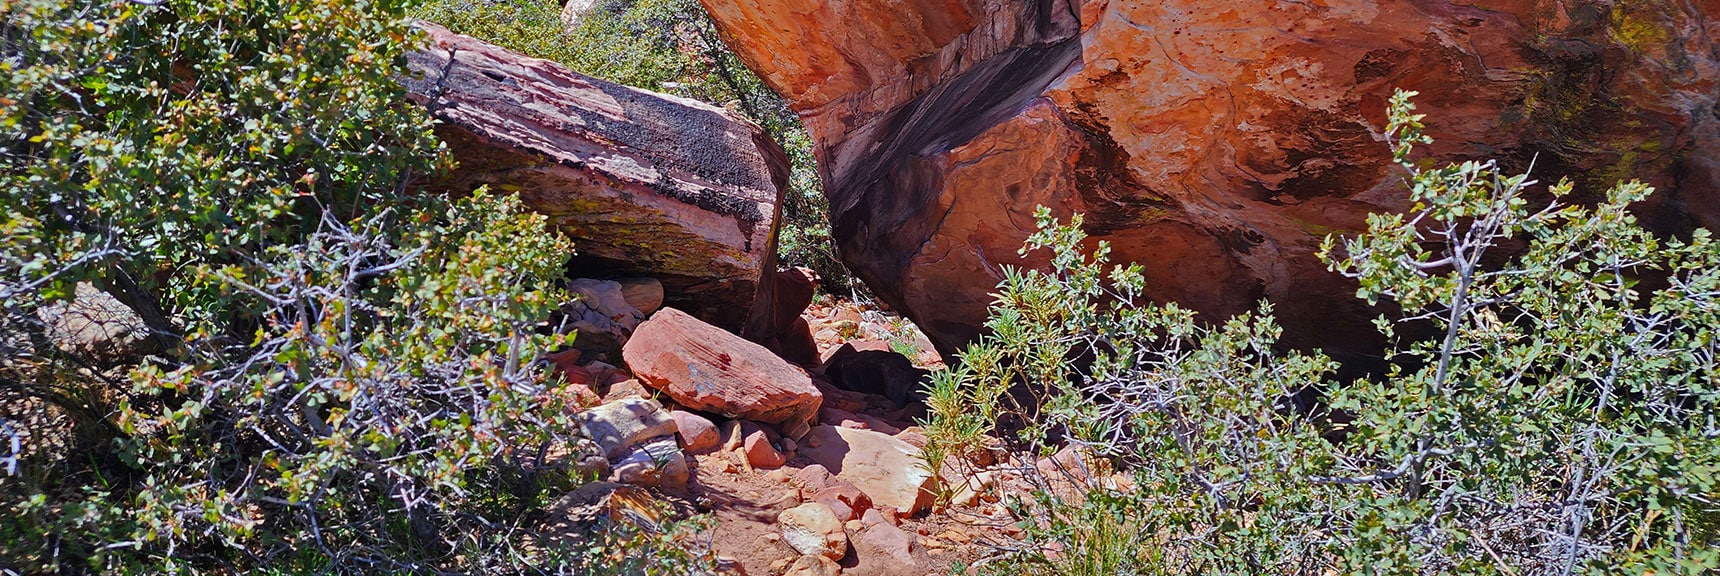 Squeeze Under the Left Side of the Boulder, Then Ascend to North Side of Canyon | Juniper Canyon | Red Rock Canyon National Conservation Area, Nevada | David Smith | LasVegasAreaTrails.com